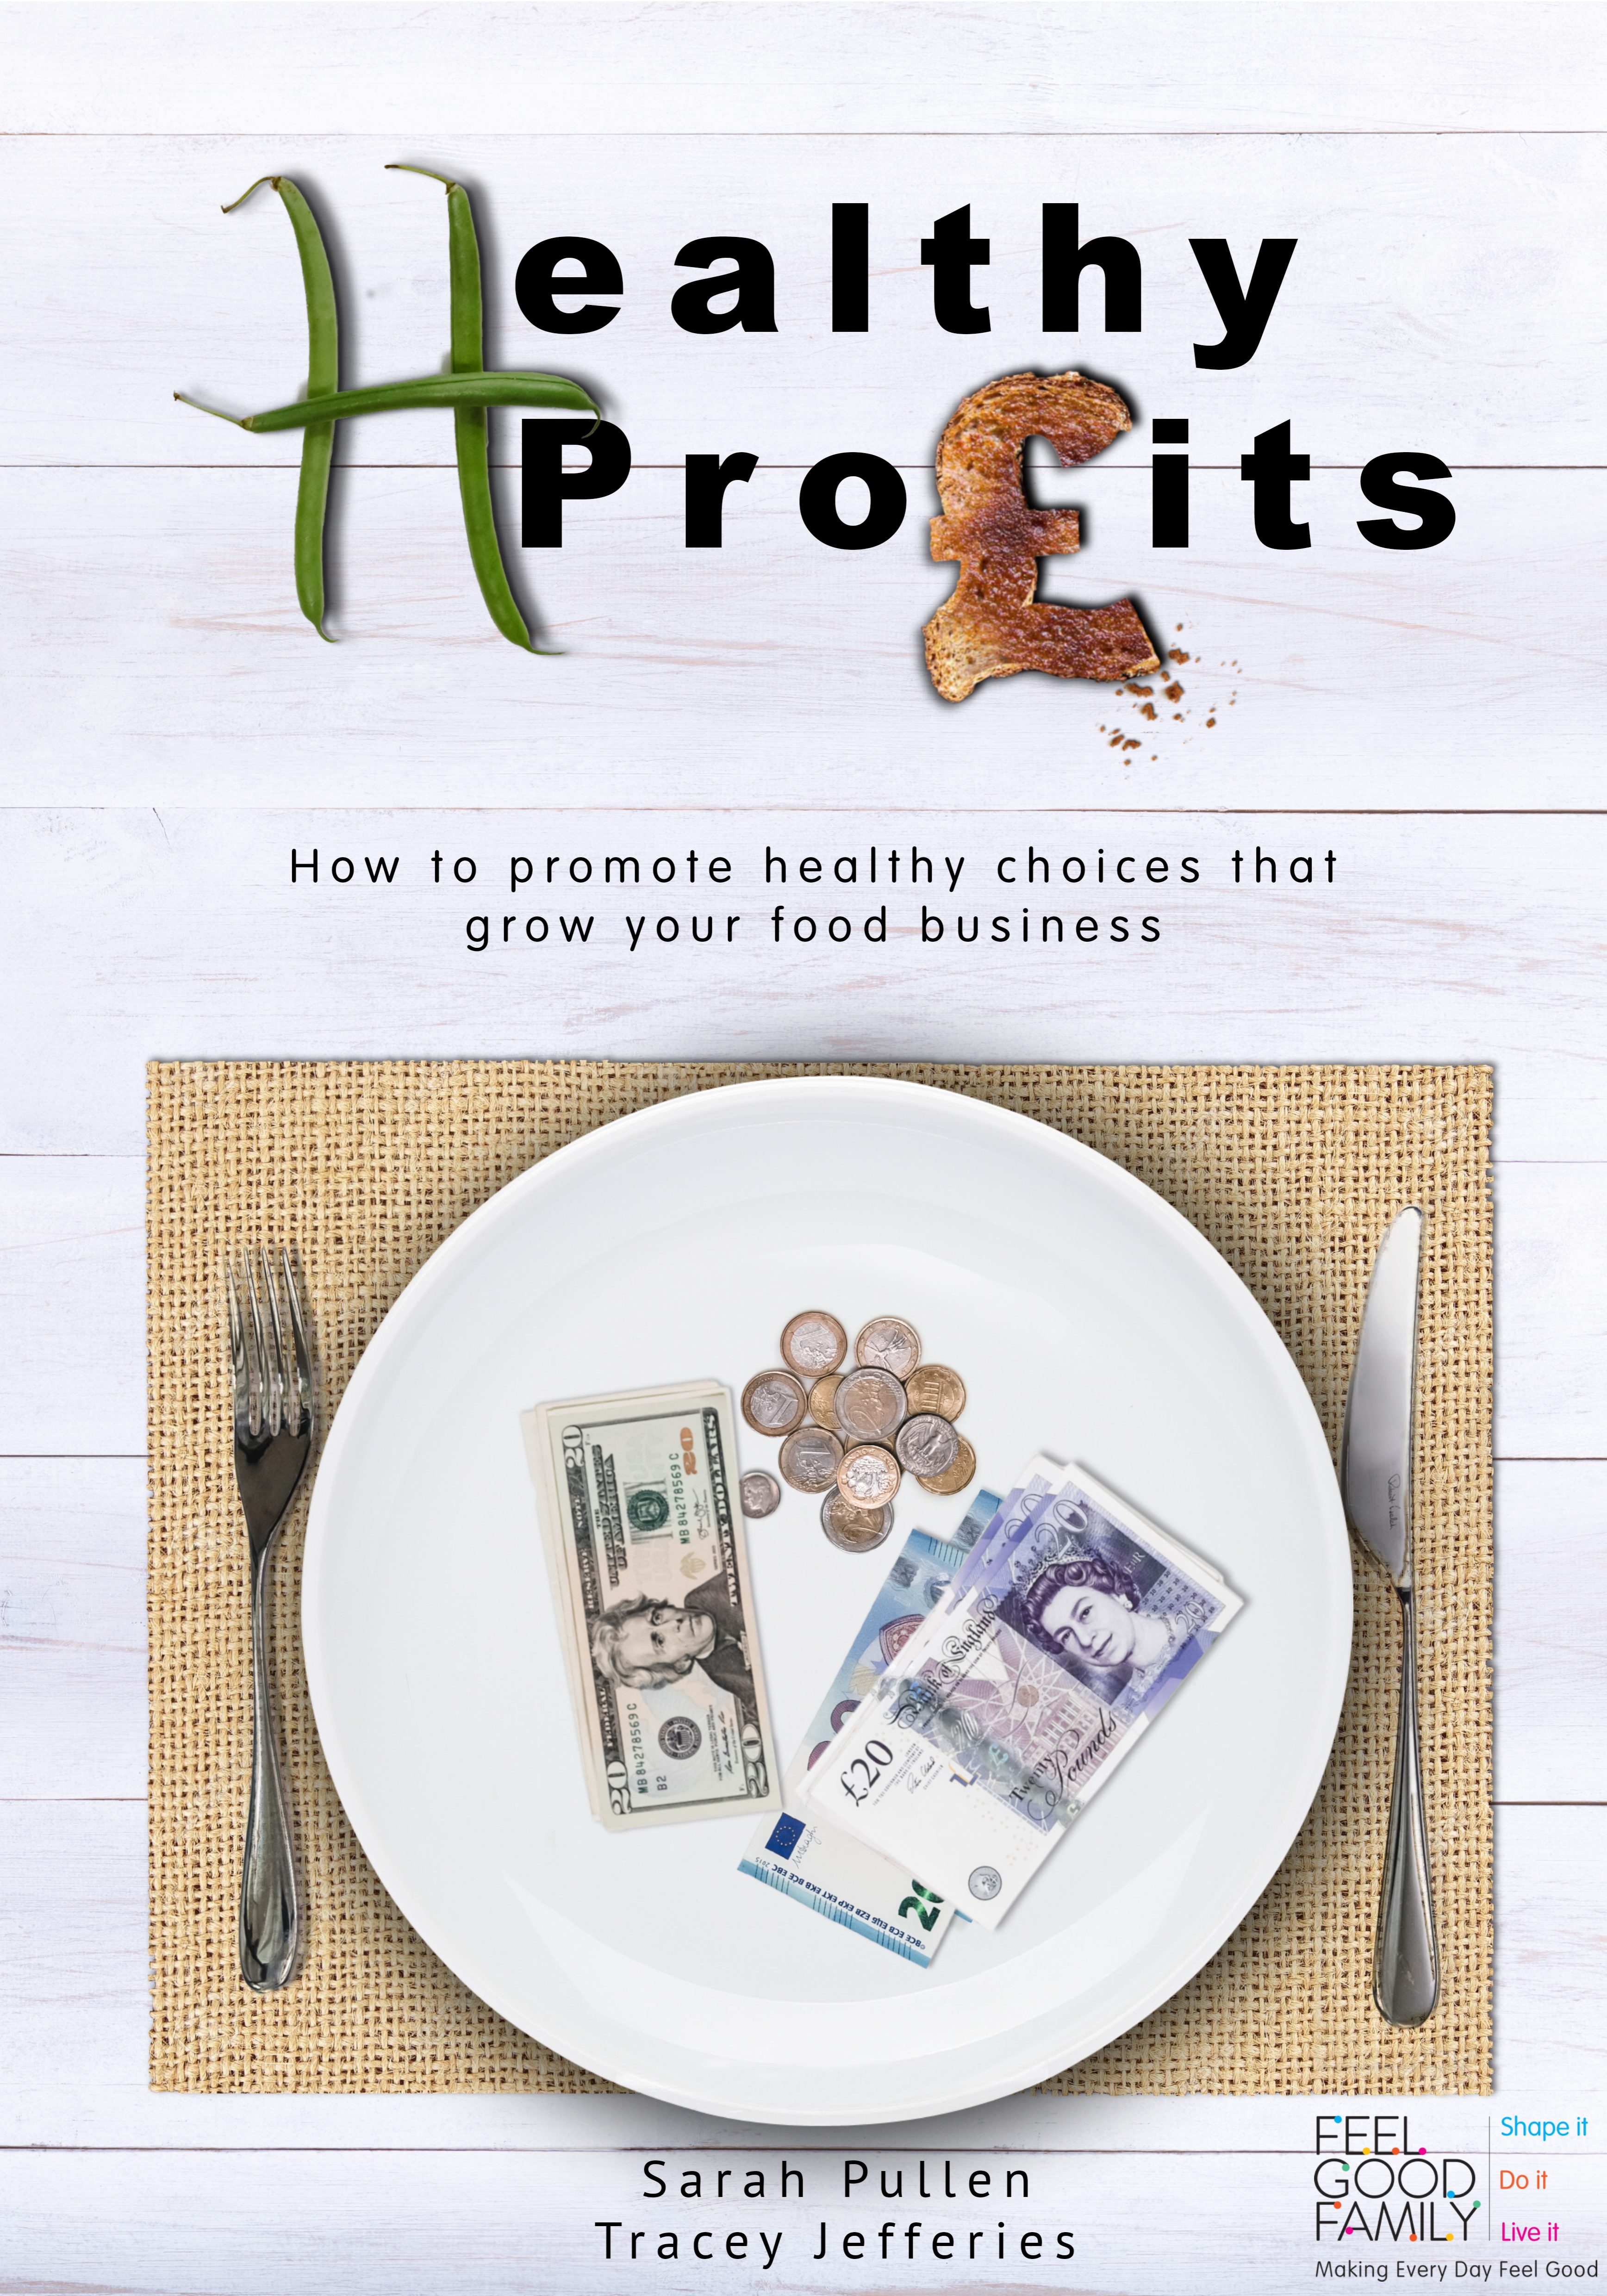 Healthy Profits book. How to promote healthy choices that grow your food business. By Sarah Pullen and Tracey Jefferies. Feel Good Family.